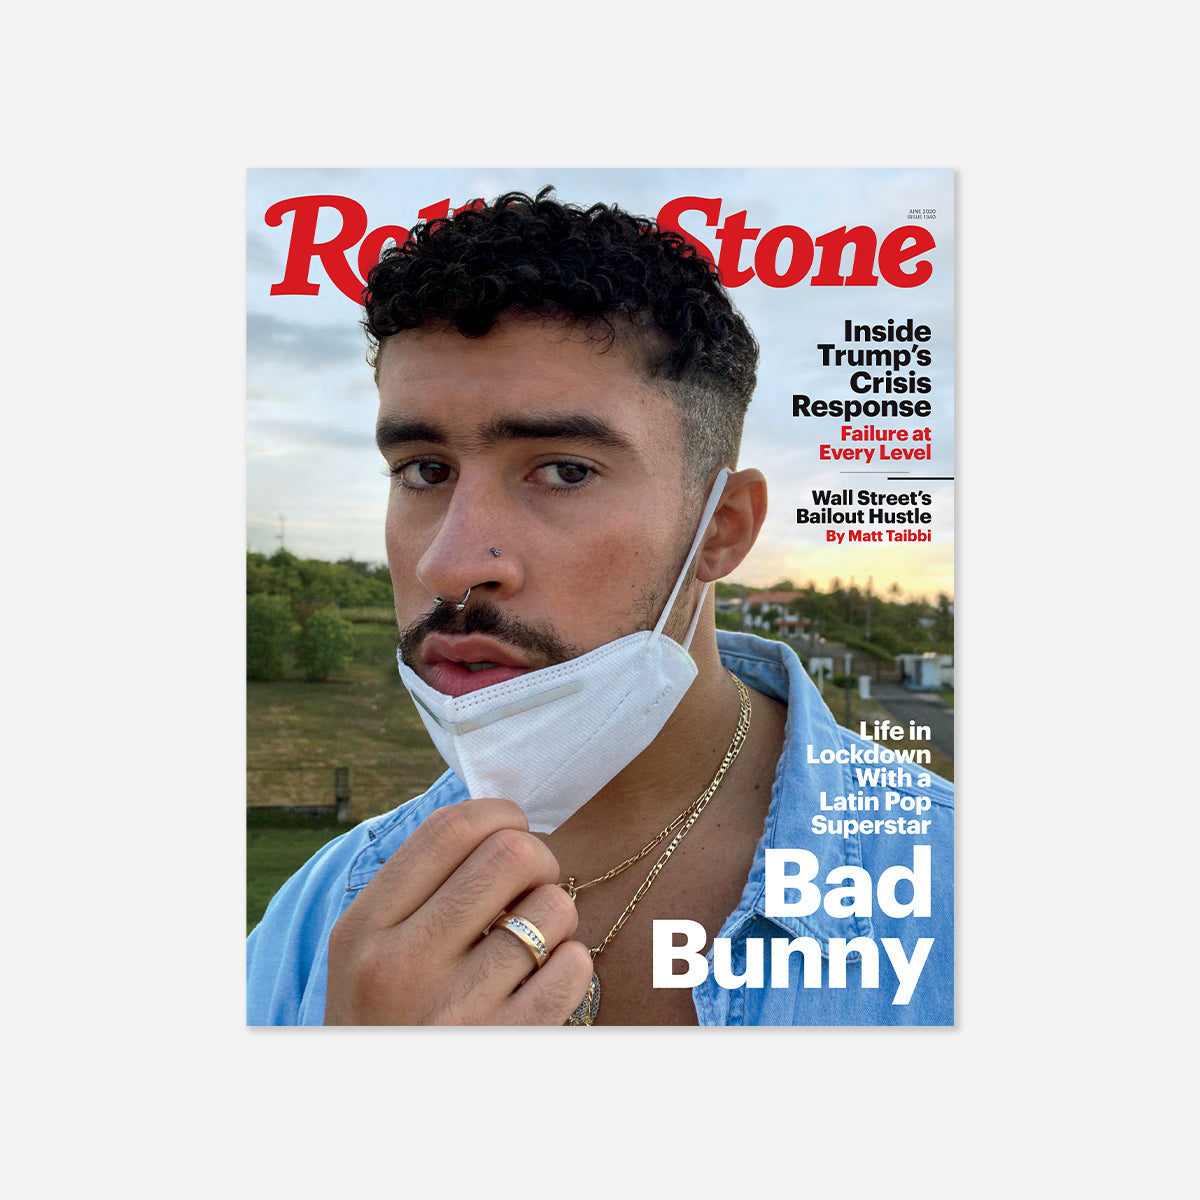 Rolling Stone Magazine June 2020 Featuring Bad Bunny (Issue 1340)